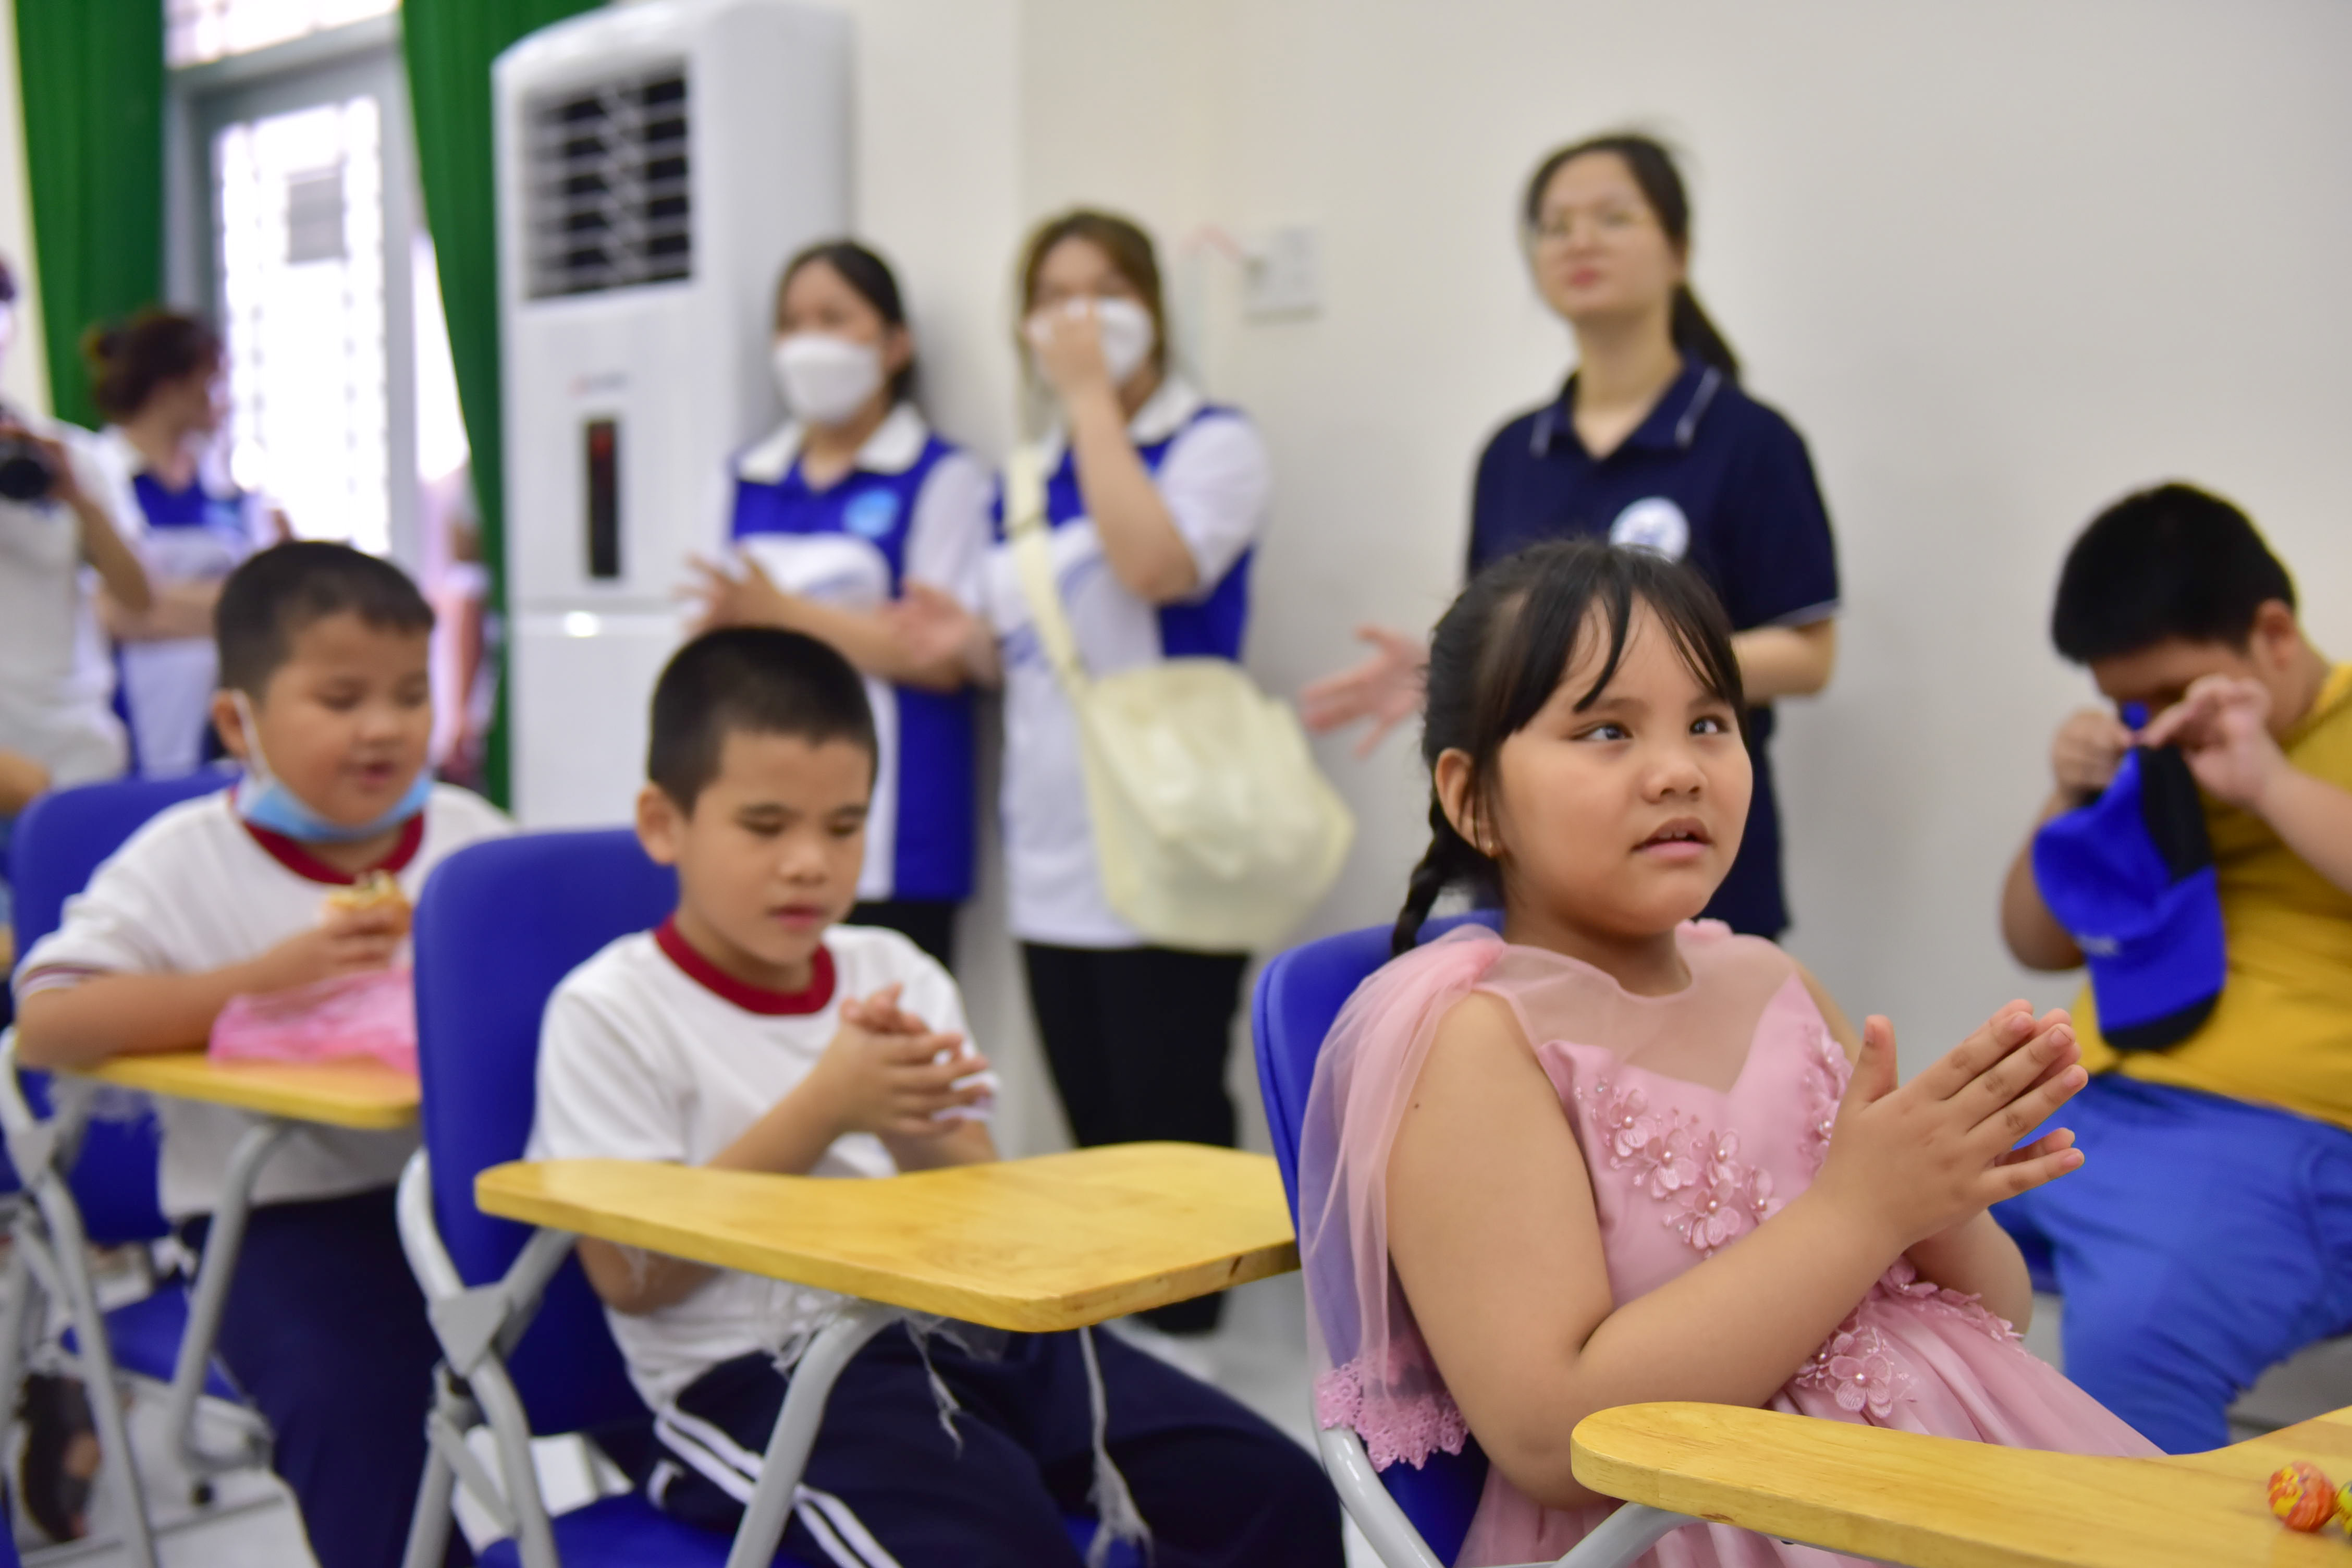 Students enjoy a music performance at an event to celebrate the Mid-Autumn Festival held by Nguyen Dinh Chieu Special School for the Blind in District 10, Ho Chi Minh City on September 9, 2022. Photo: Ngoc Phuong / Tuoi Tre News